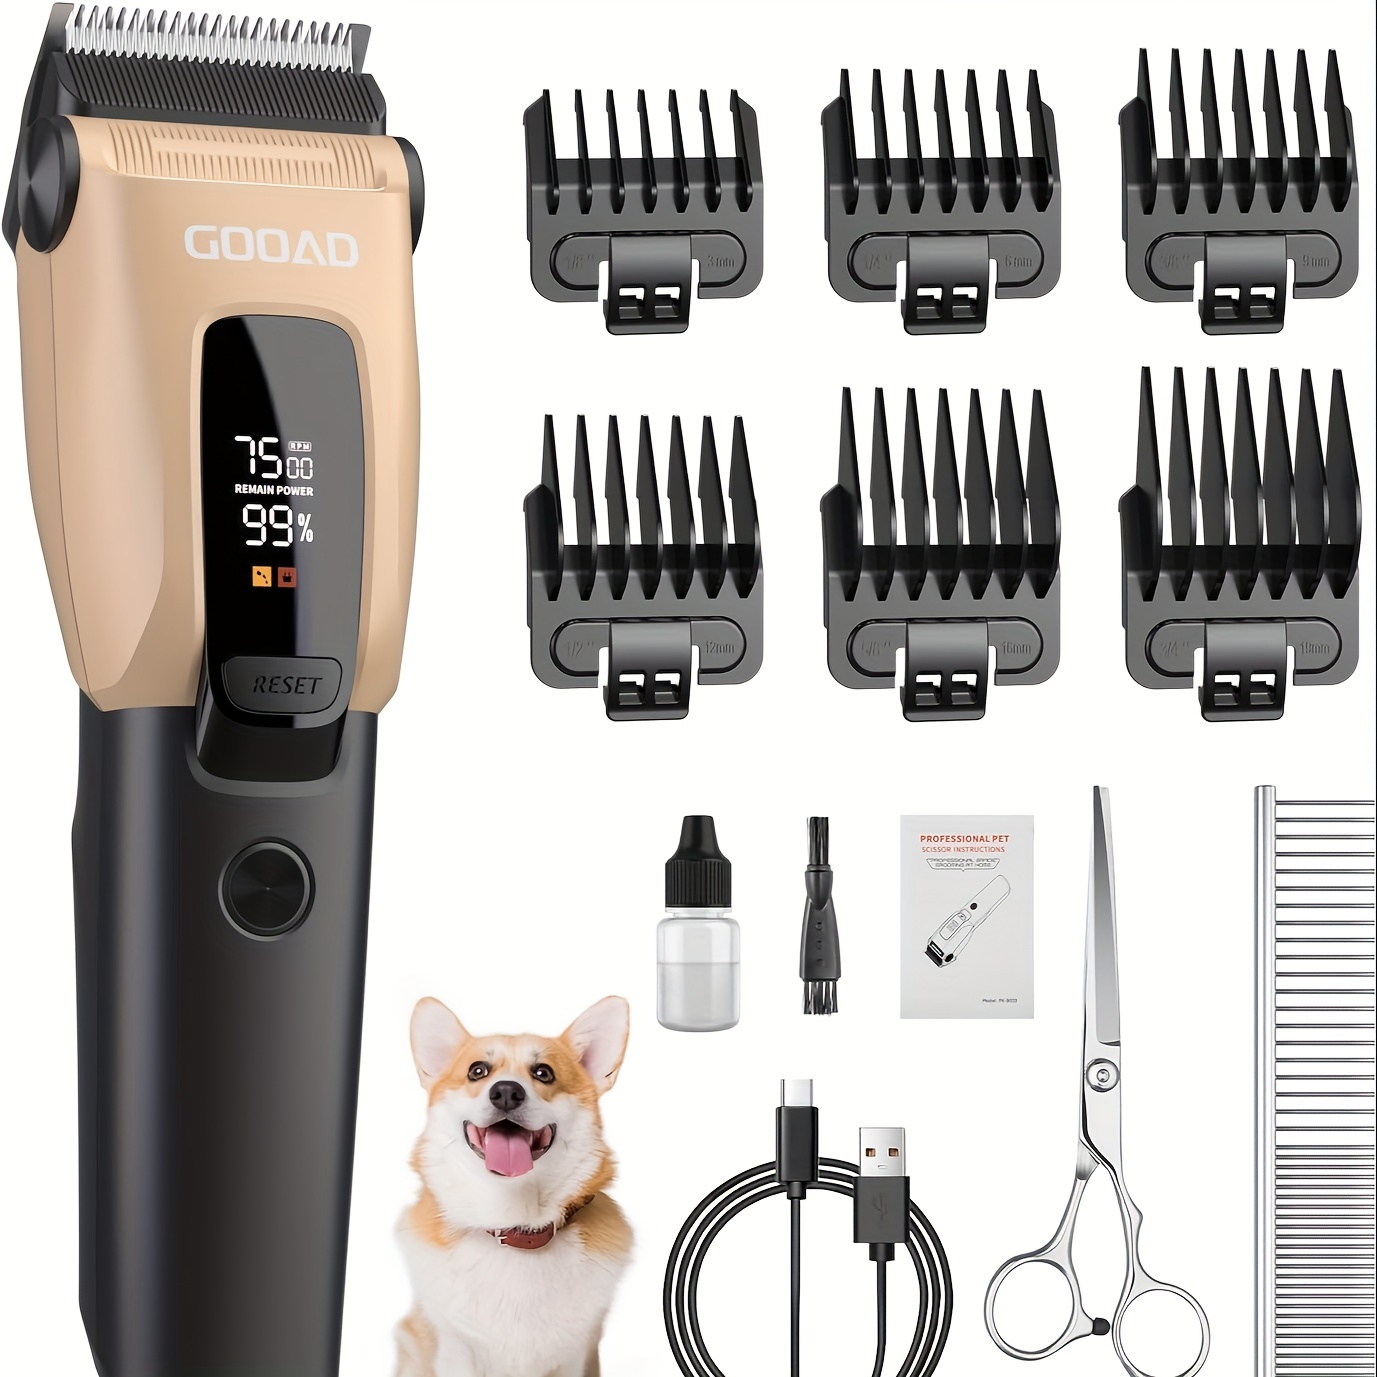 

Good Dog Clippers For Grooming For Heavy Thick Coat, 3-speed Low Noise Dog Grooming Kit, Electric Quiet Dog Hair Trimmer Cordless, Rechargeable, Pet Hair Shaver For Small And Large Dogs Cats